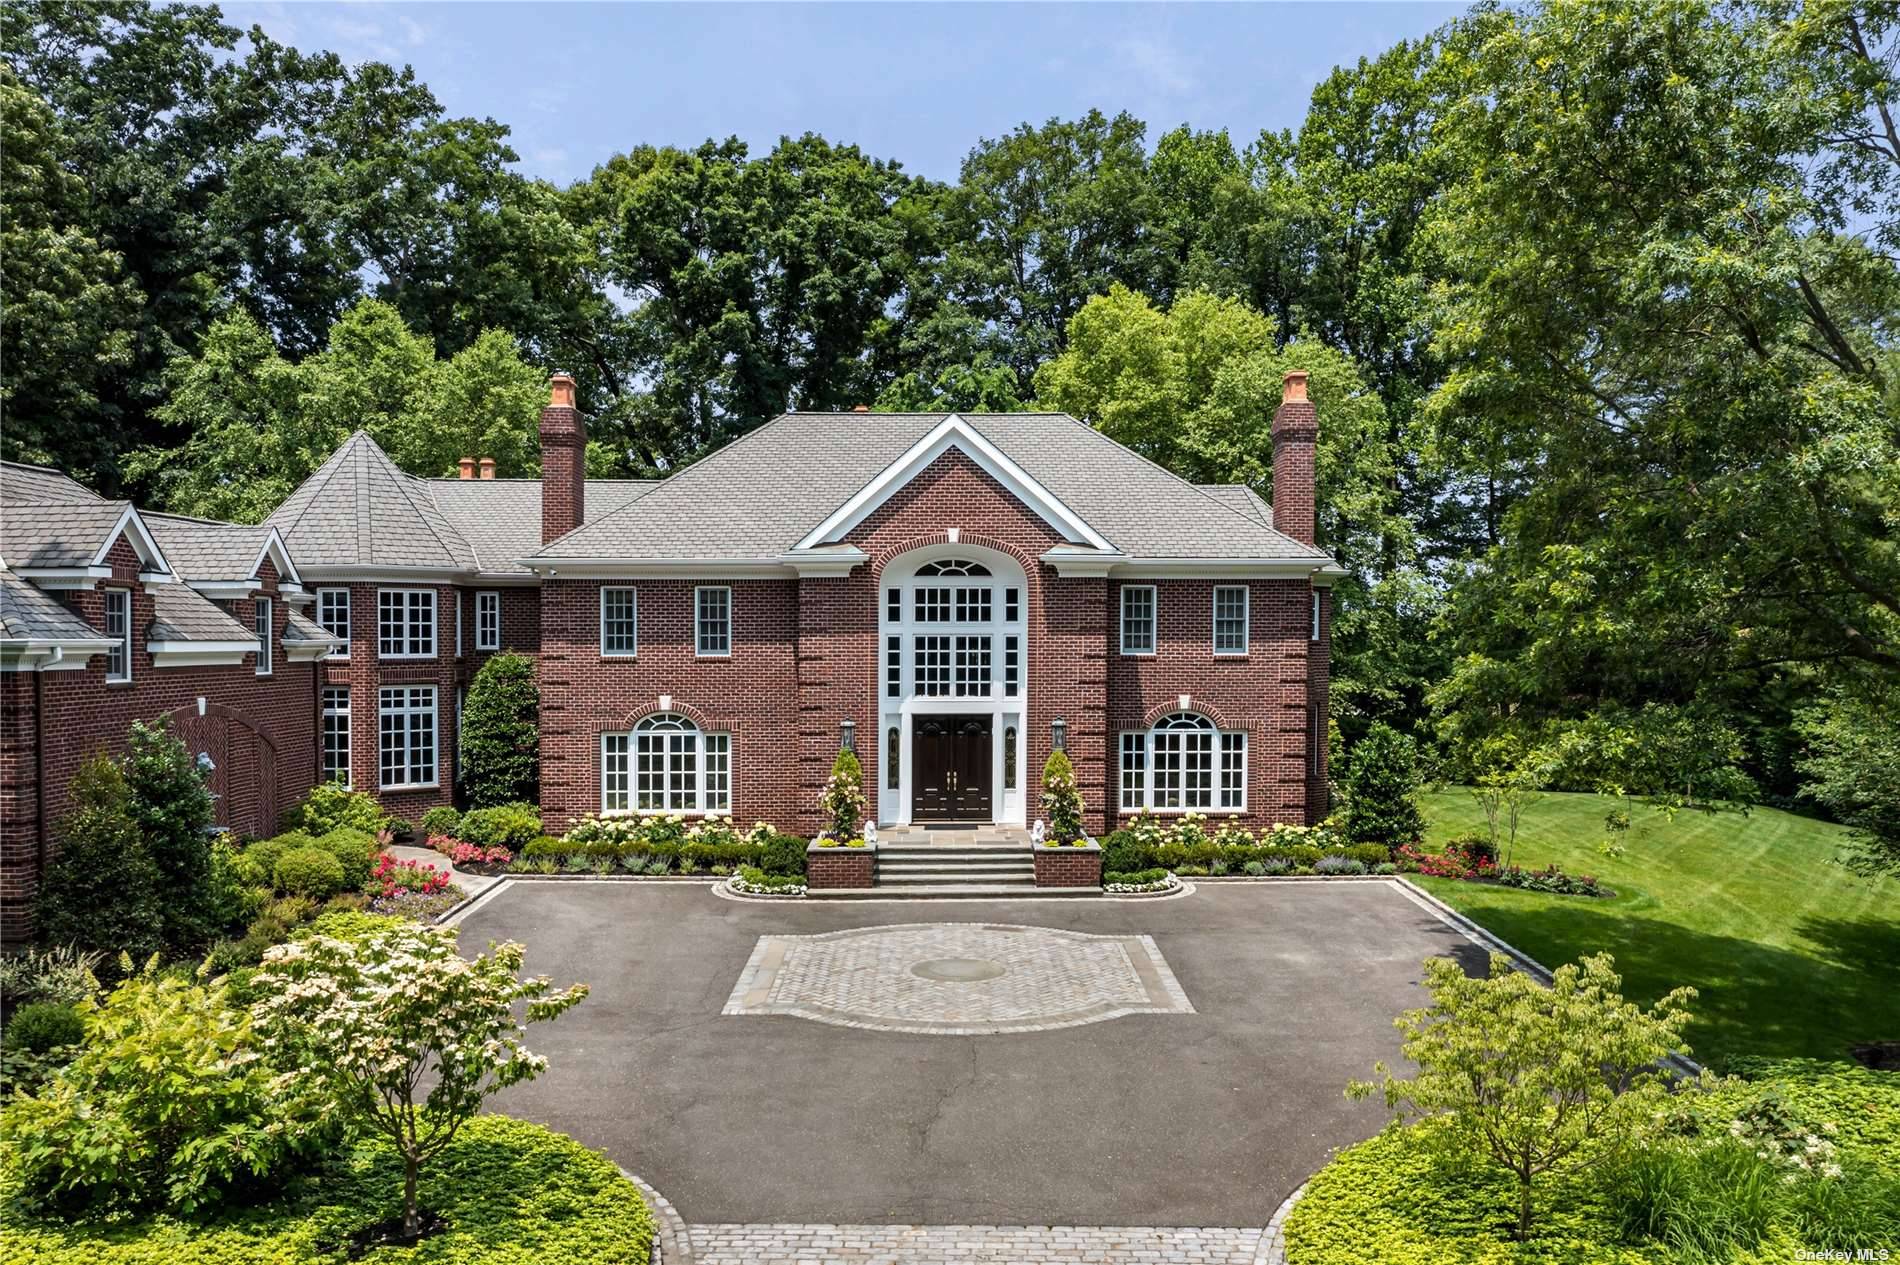 Located in the esteemed Village of Mill Neck, One La Colline Drive is a stunning 6 bedroom, 6.